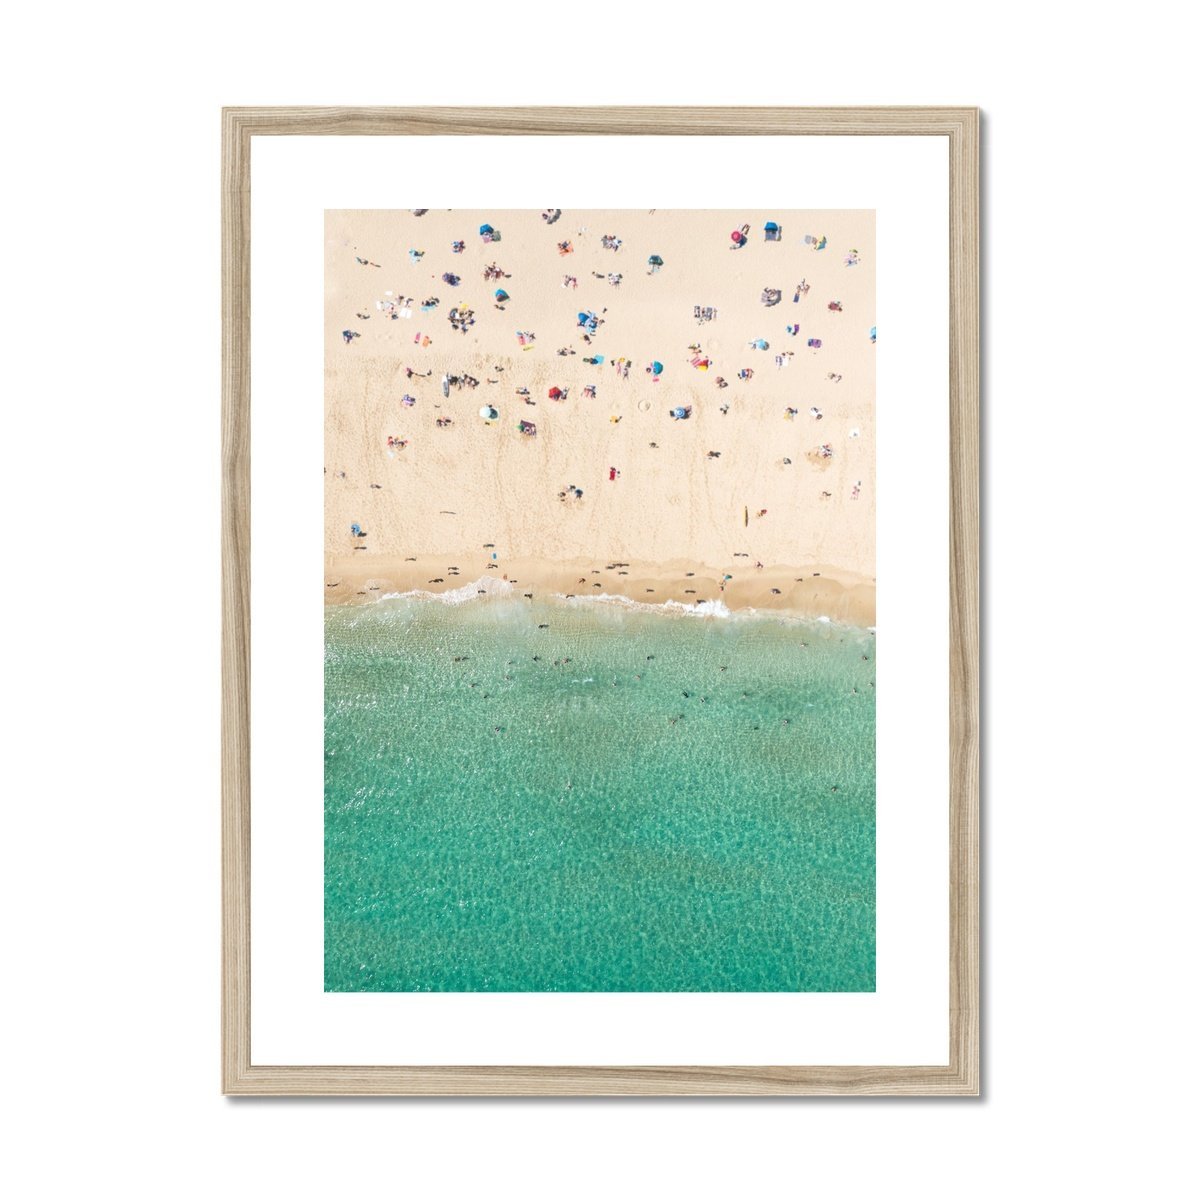 beachgoers at porthcurno wooden frame